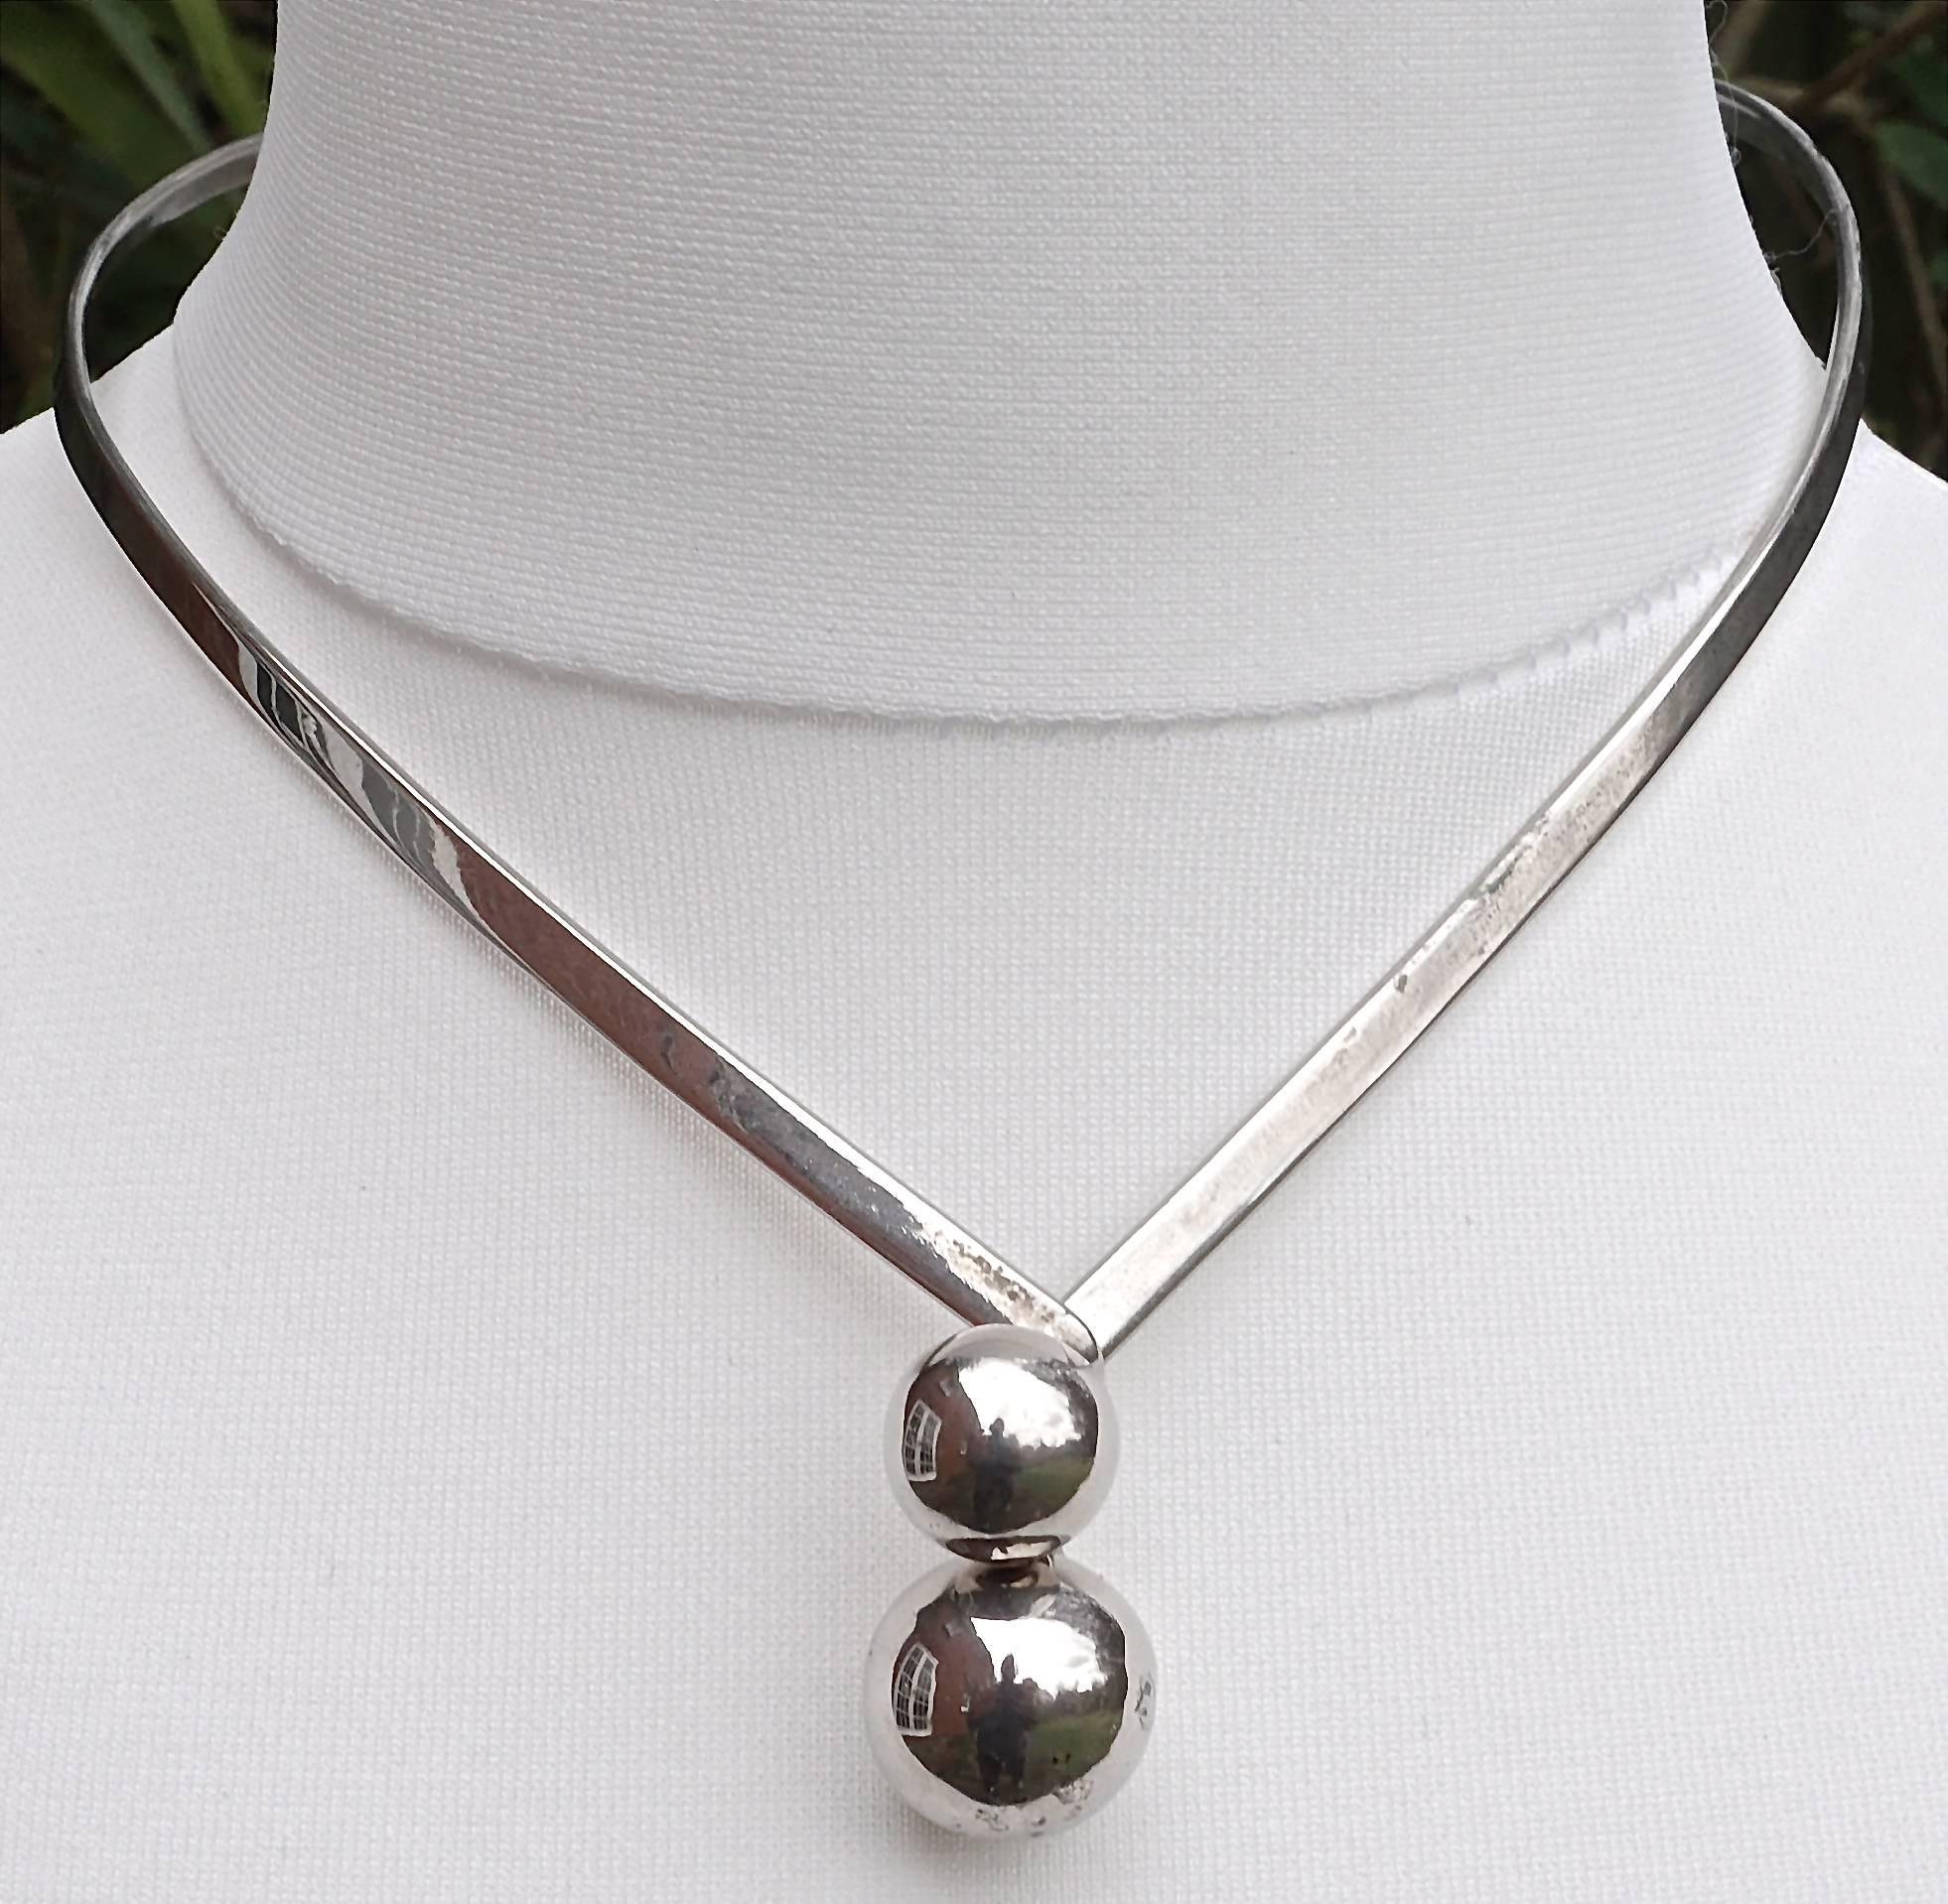 Stylish silver tone torque necklace, featuring two simple interlocking balls that fasten at the front. Length approximately 43cm / 17 inches, and width 4mm / .16 inches. The silver balls are length 2.8cm / 1.1 inch, and the largest ball is diameter